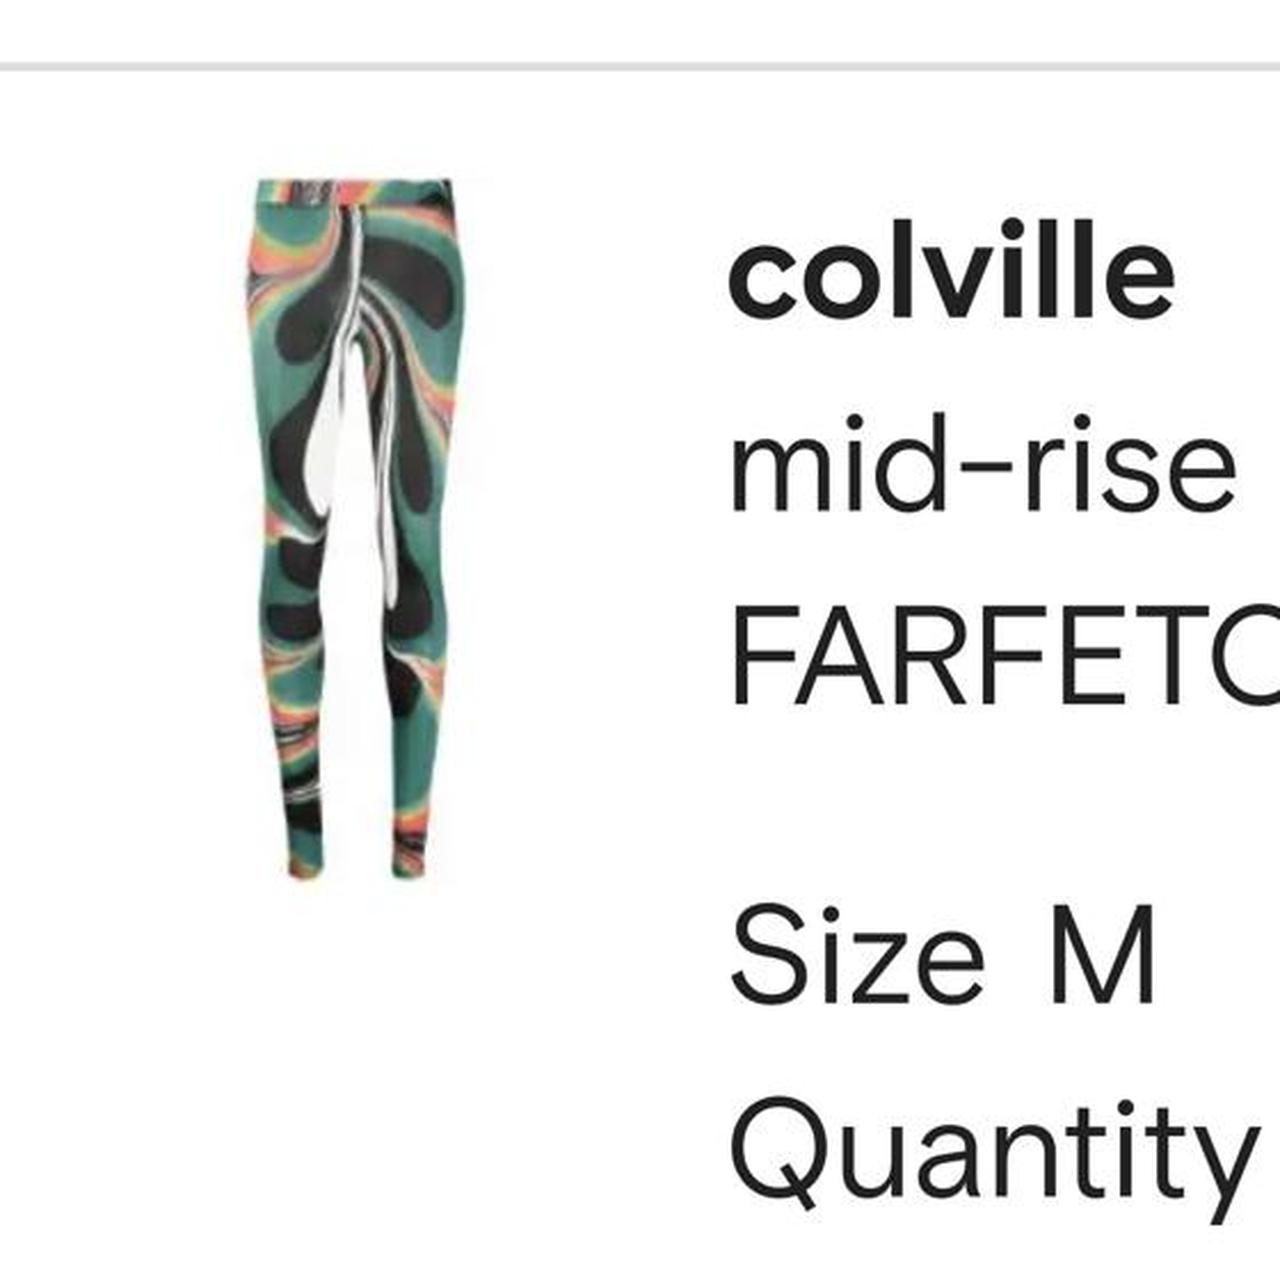 Product Image 3 - Printed tights by Colville
Can Mitch